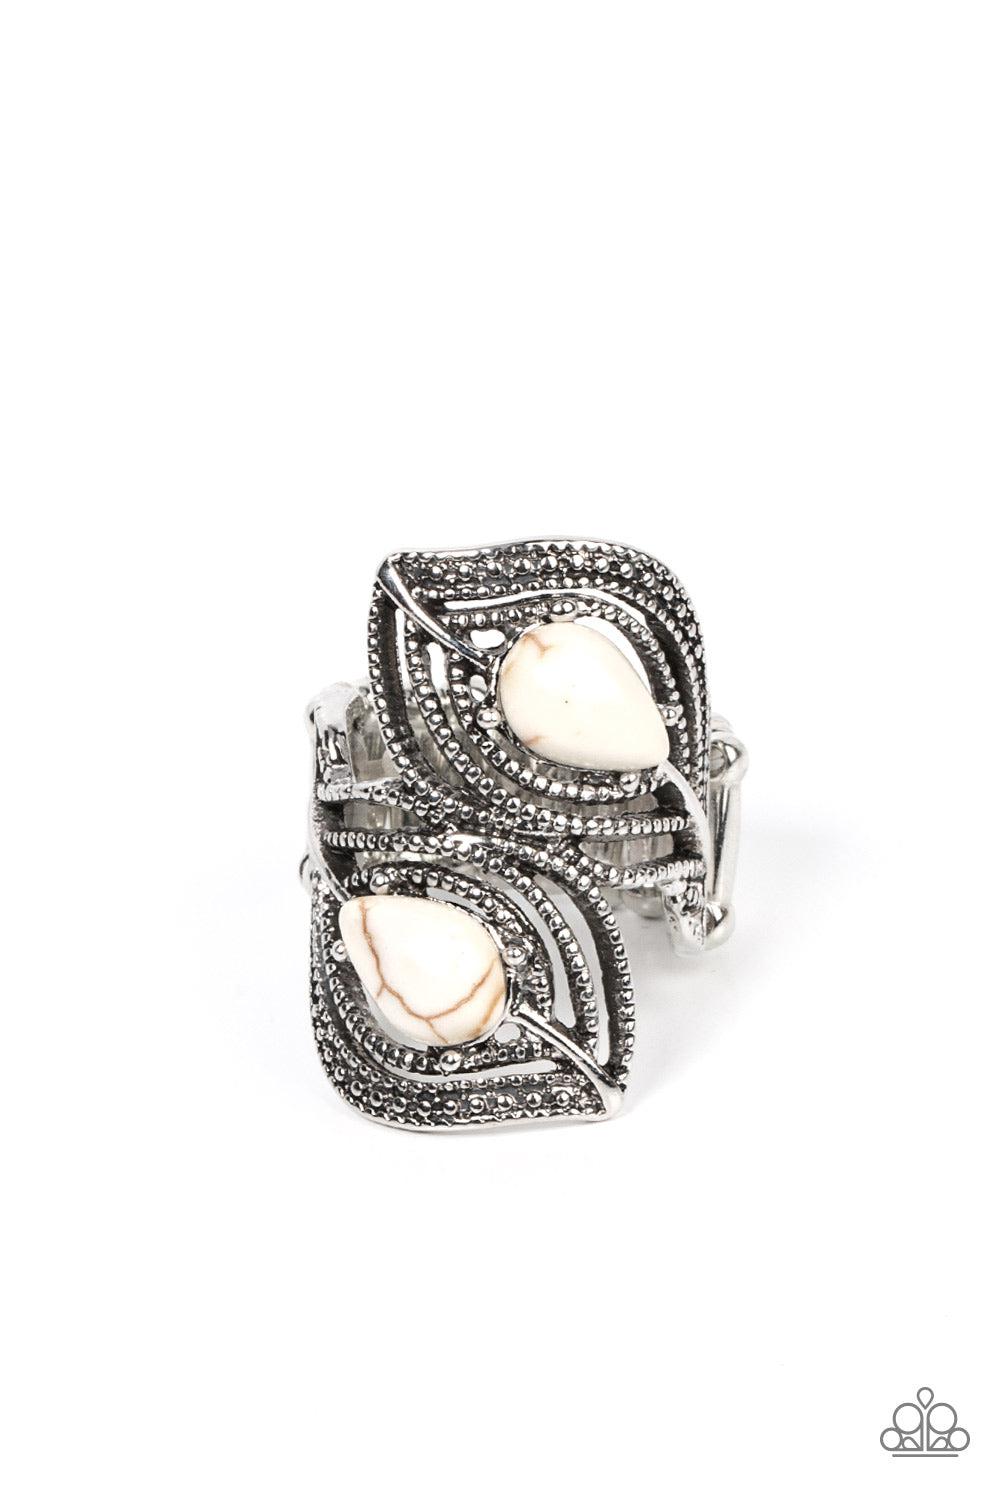 Mesa Mystique White Stone Ring - Paparazzi Accessories- lightbox - CarasShop.com - $5 Jewelry by Cara Jewels